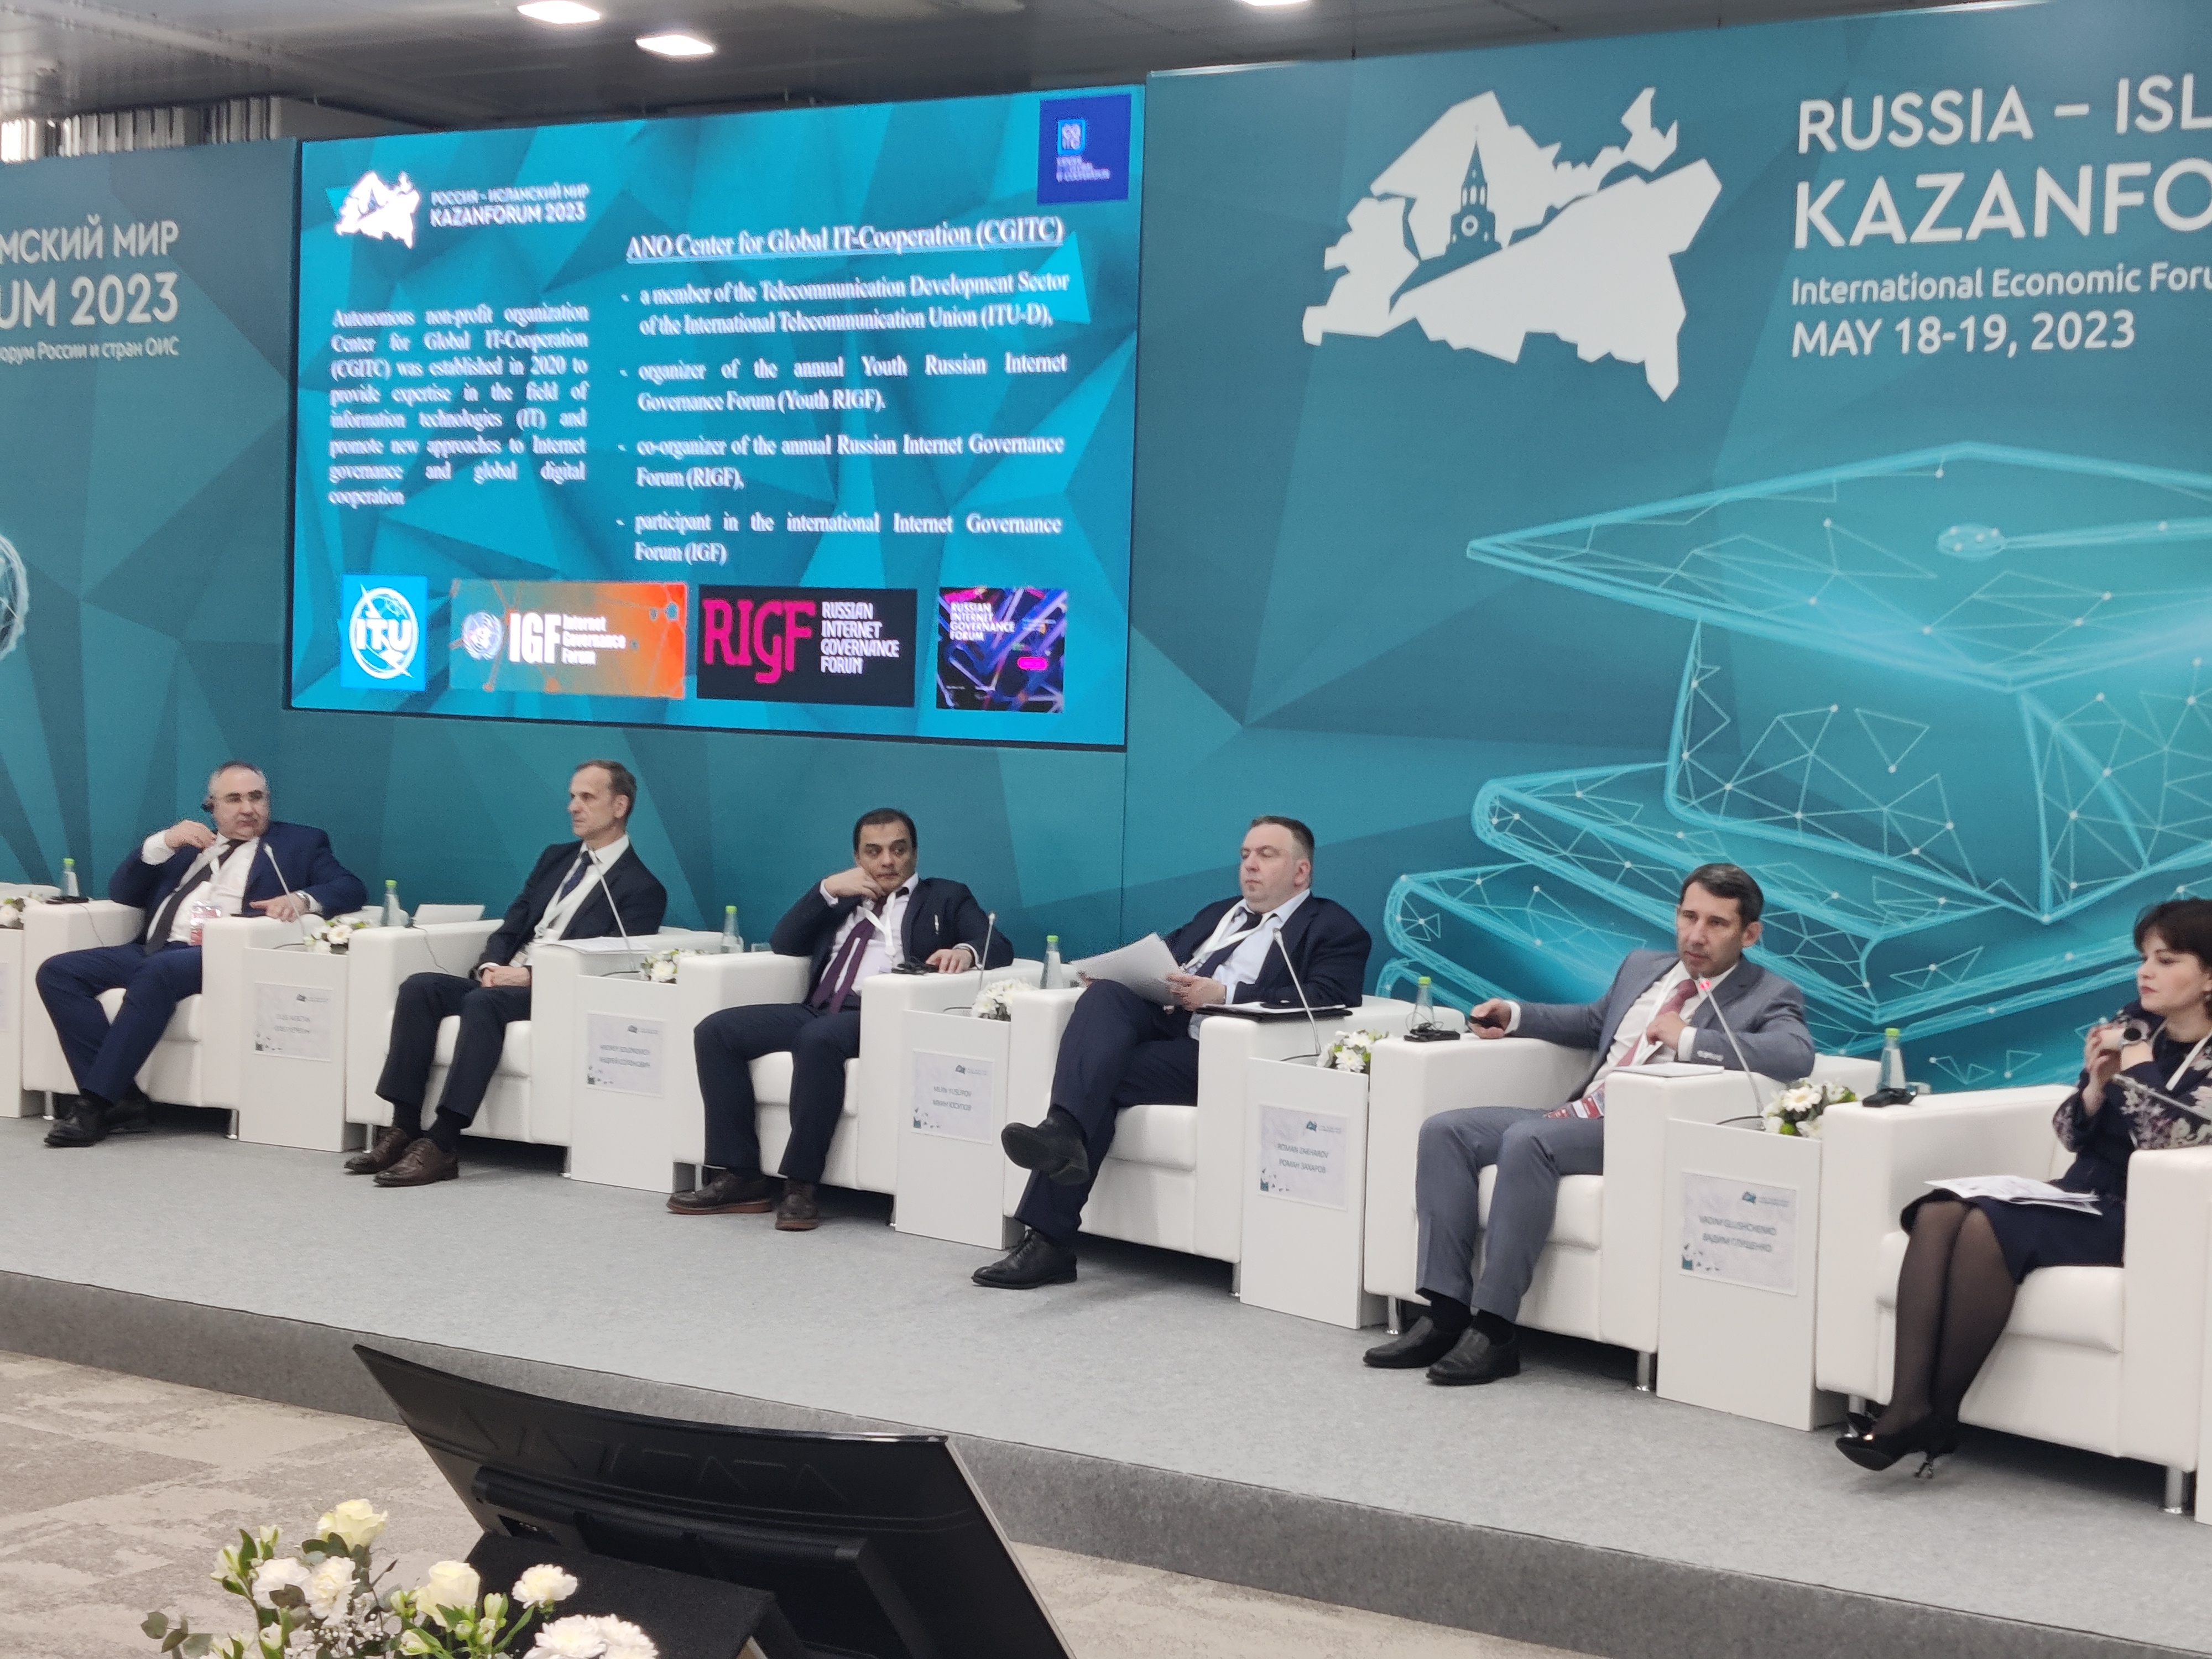 The Center for Global IT Cooperation took part in the forum "Russia - Islamic World: Kazanforum"